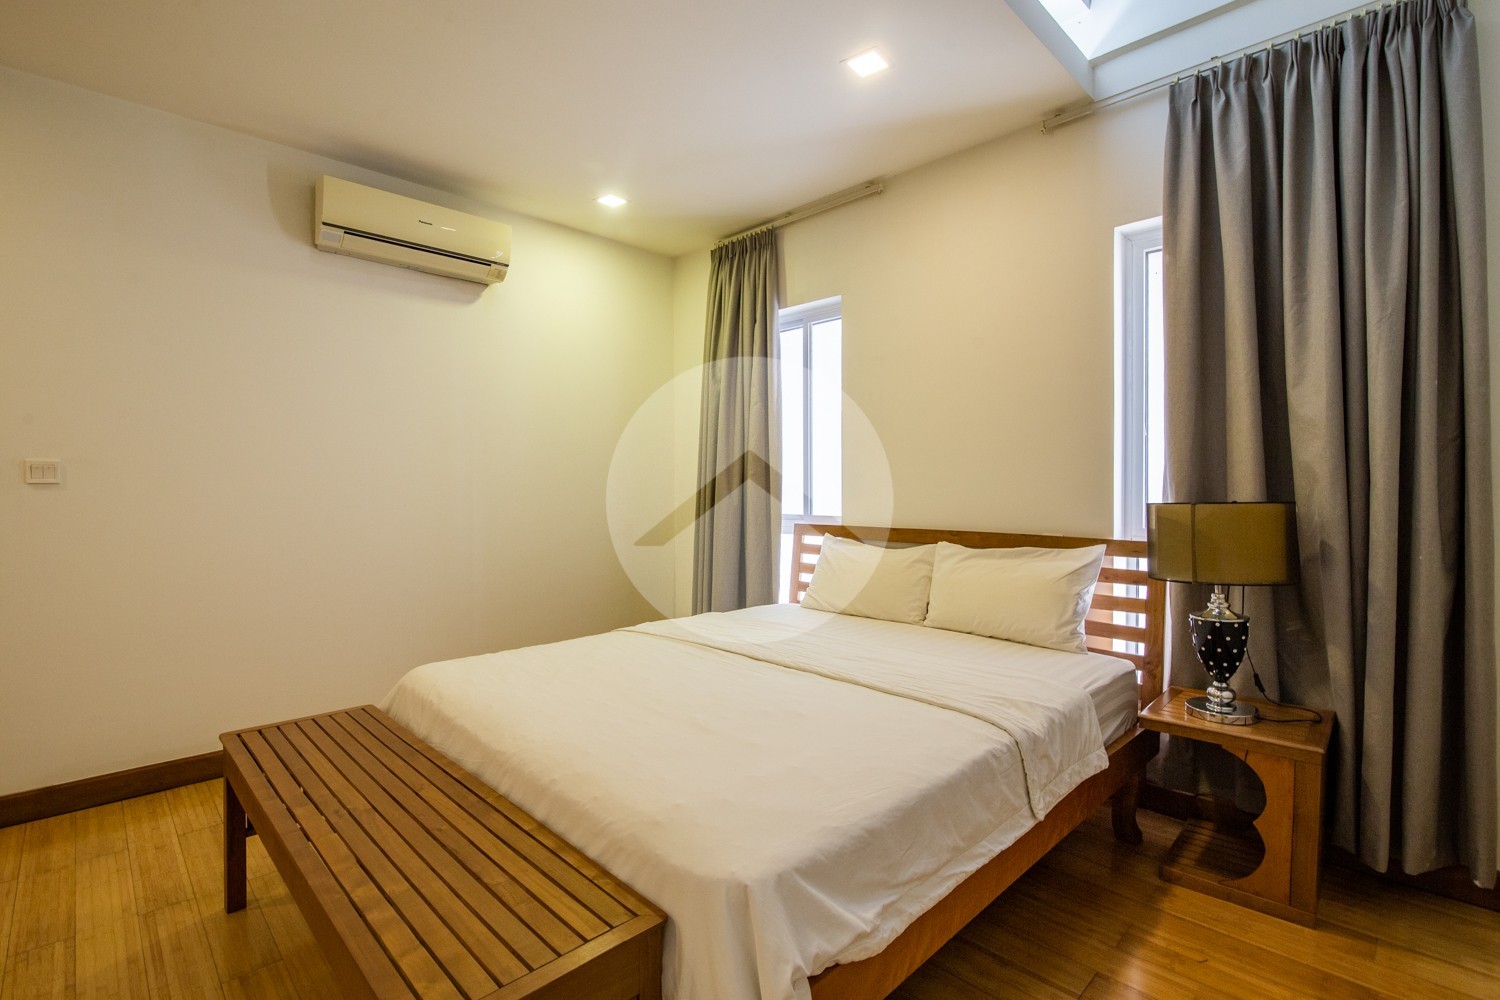 BKK1 Serviced Apartment for Rent - 2 Bedrooms thumbnail